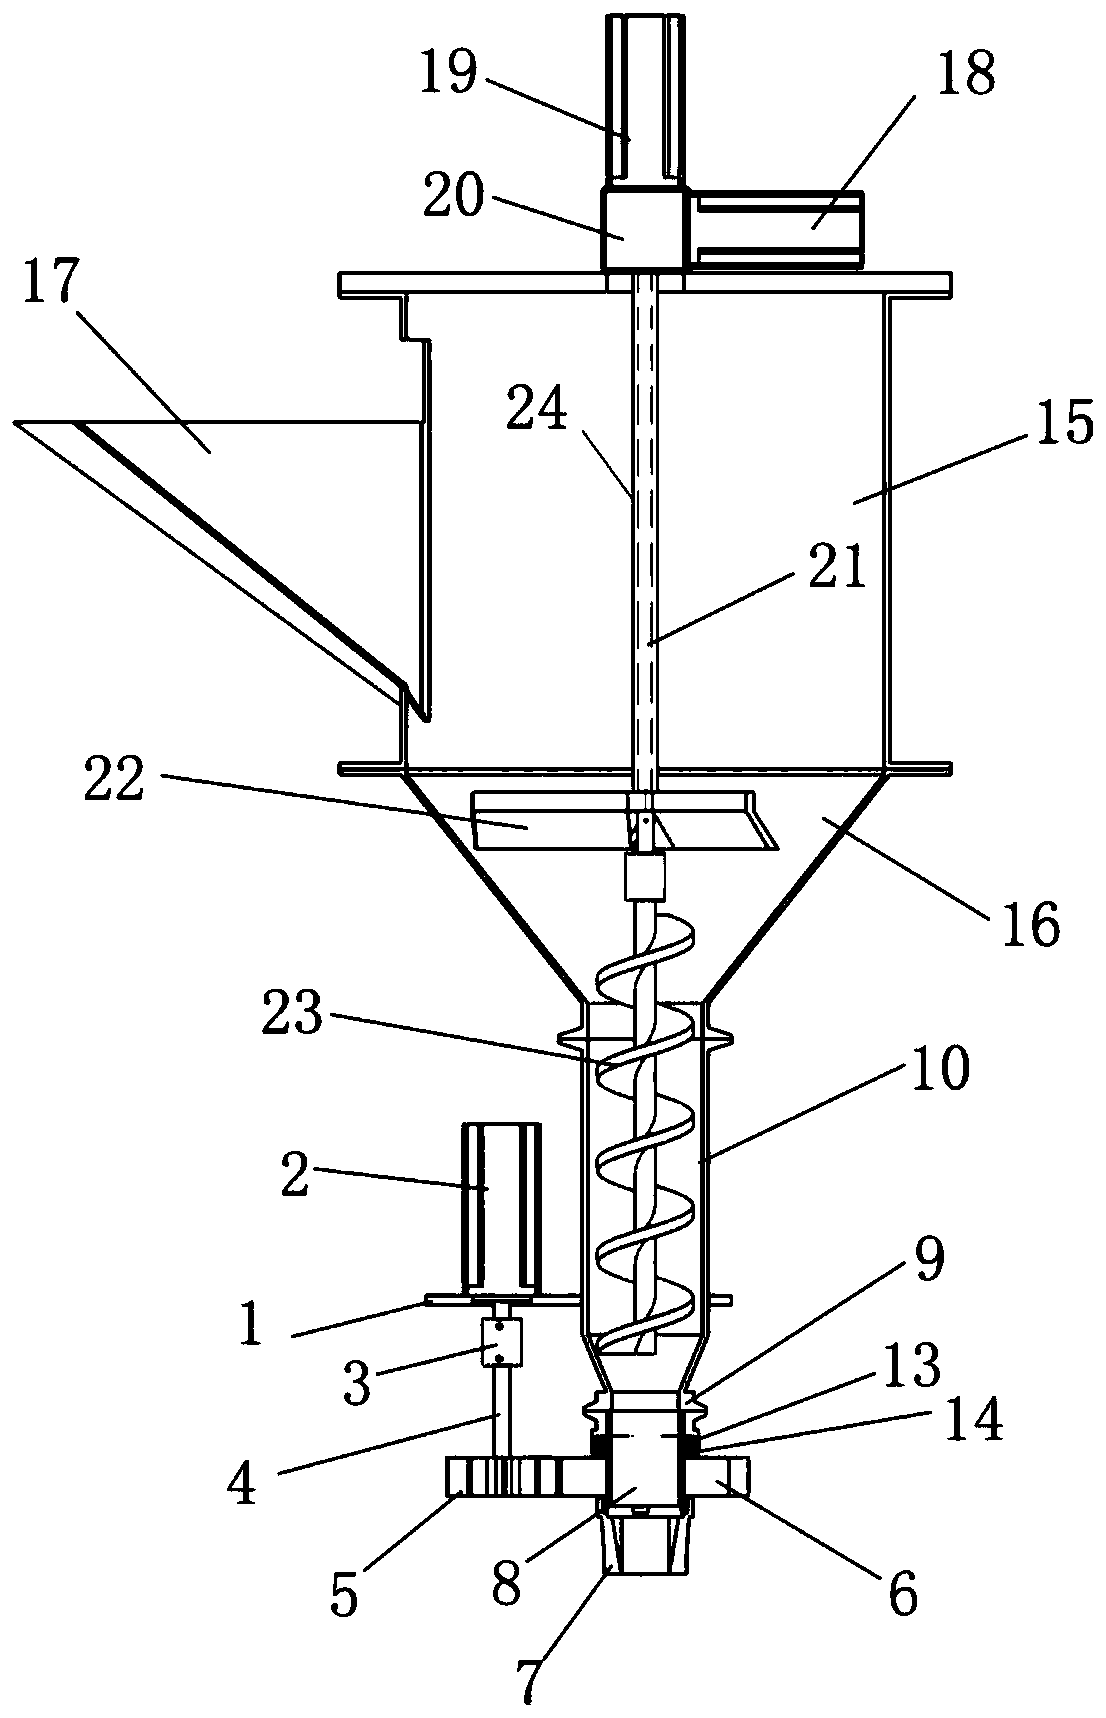 Nozzle device for building 3D printing and control method